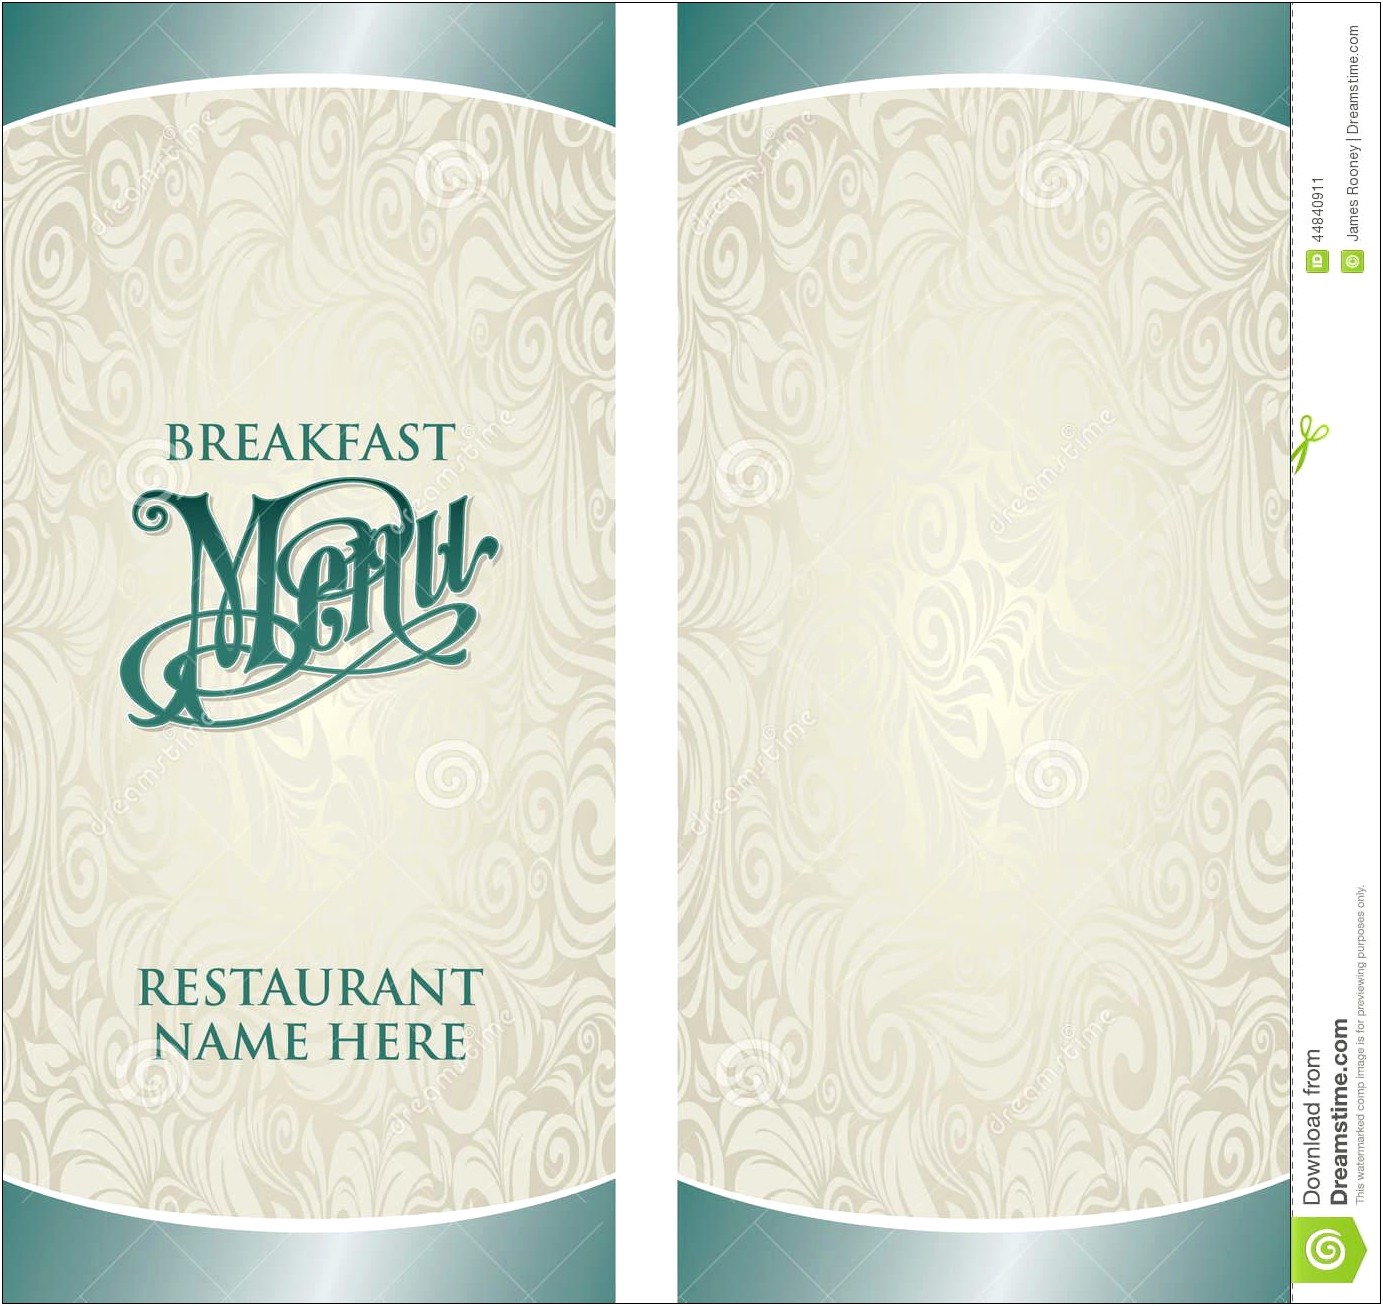 Awesome Restaurant Menu Word Template Free